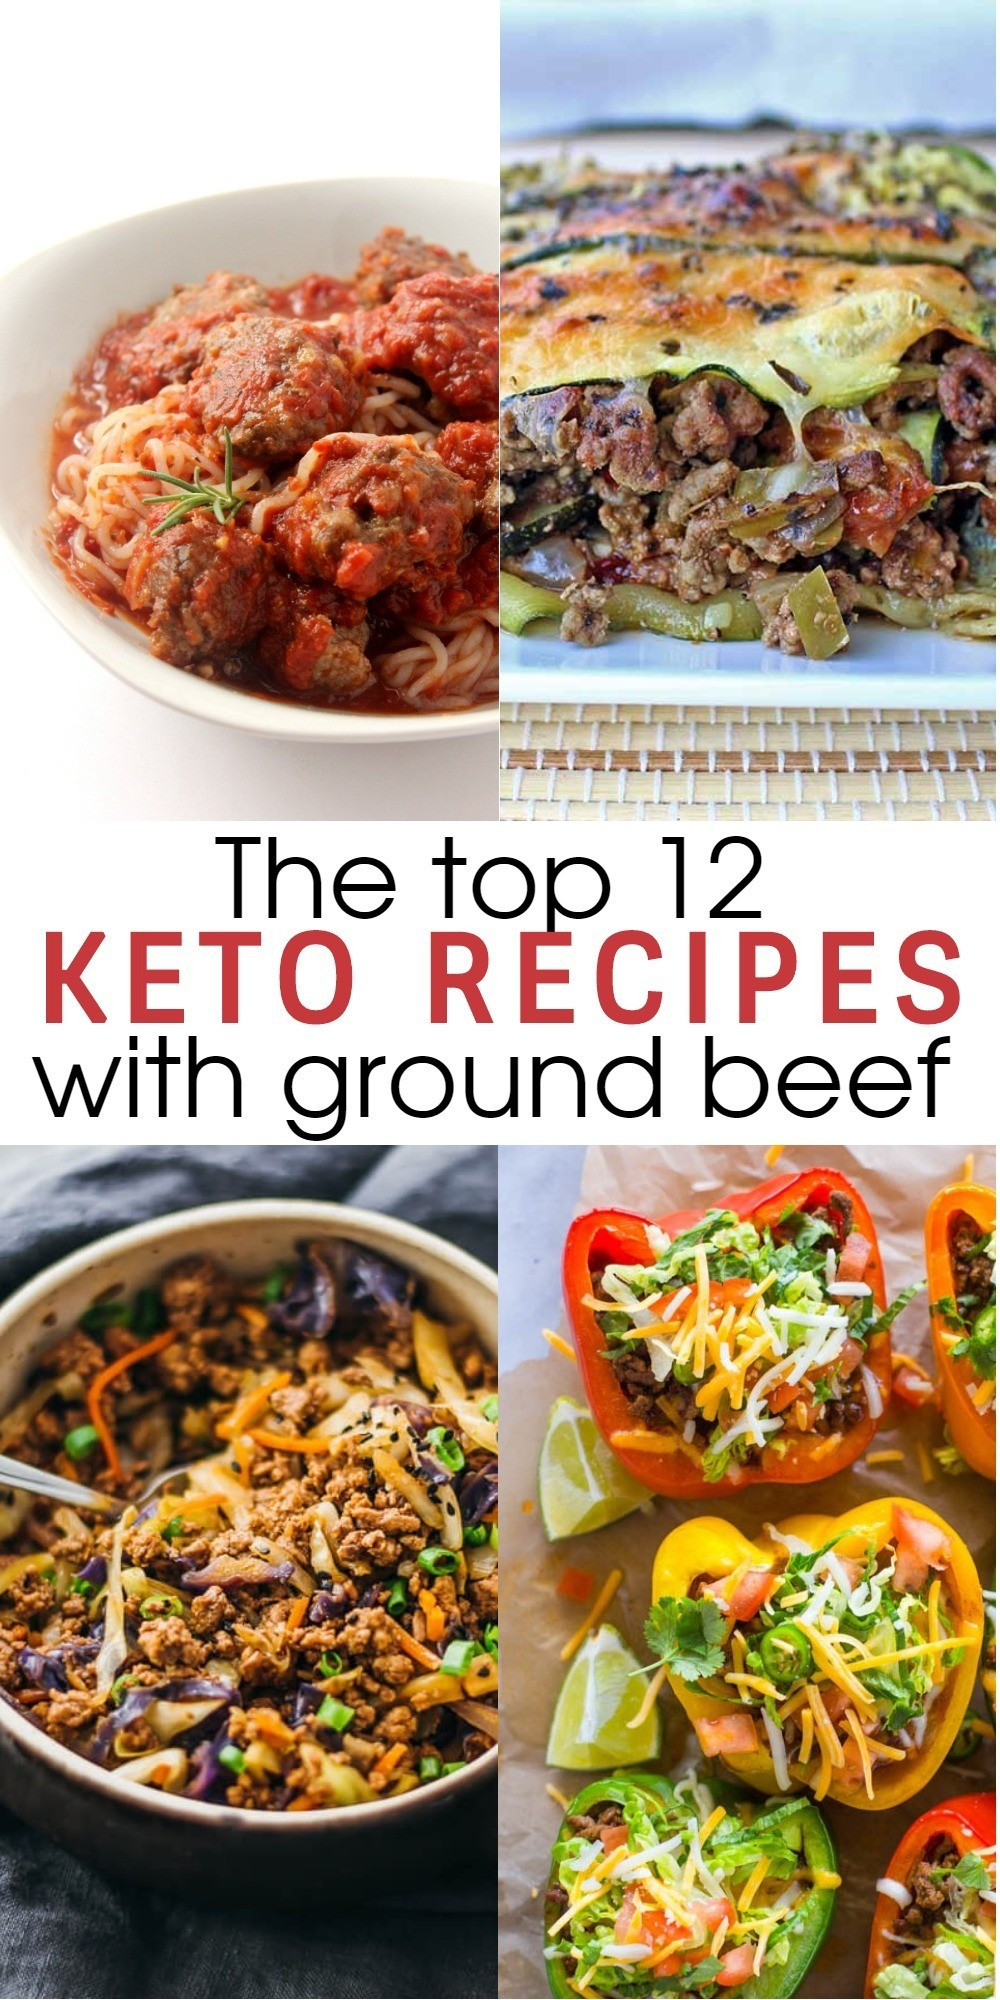 Hamburger Keto Meals
 12 Flavorful and Easy Keto Recipes With Ground Beef To Try